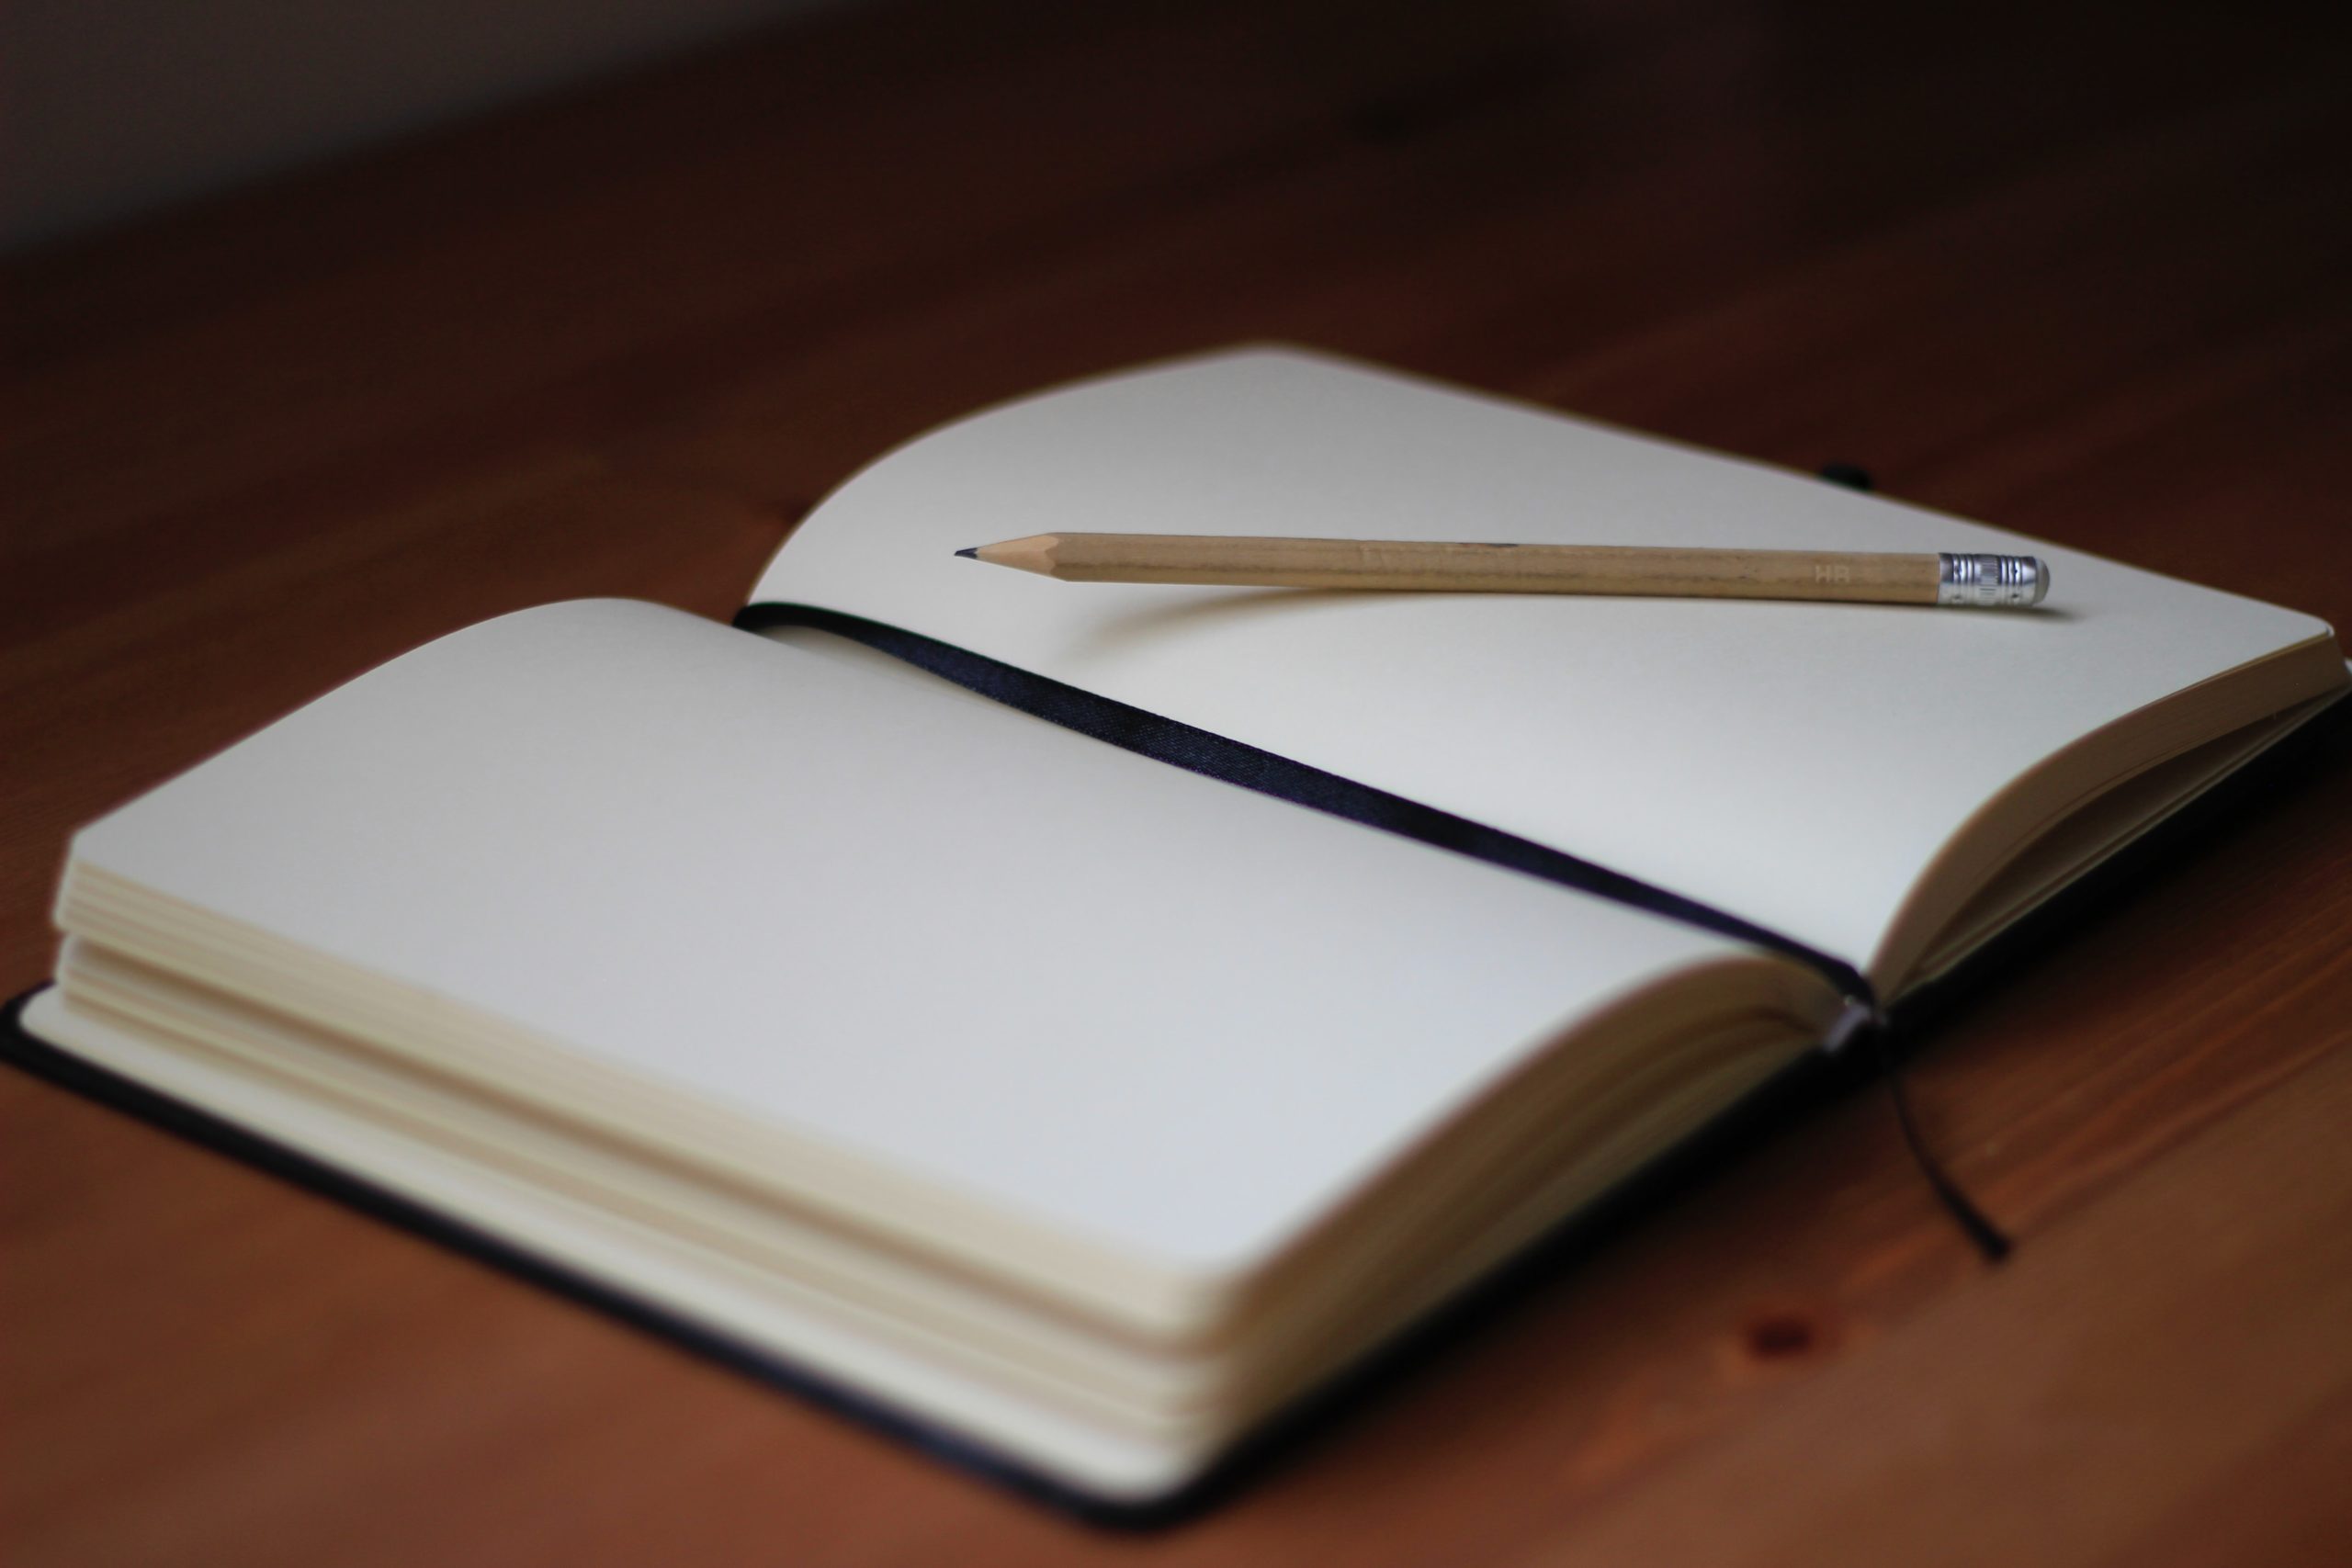 How To Make A Travel Journal You’ll Keep Up With